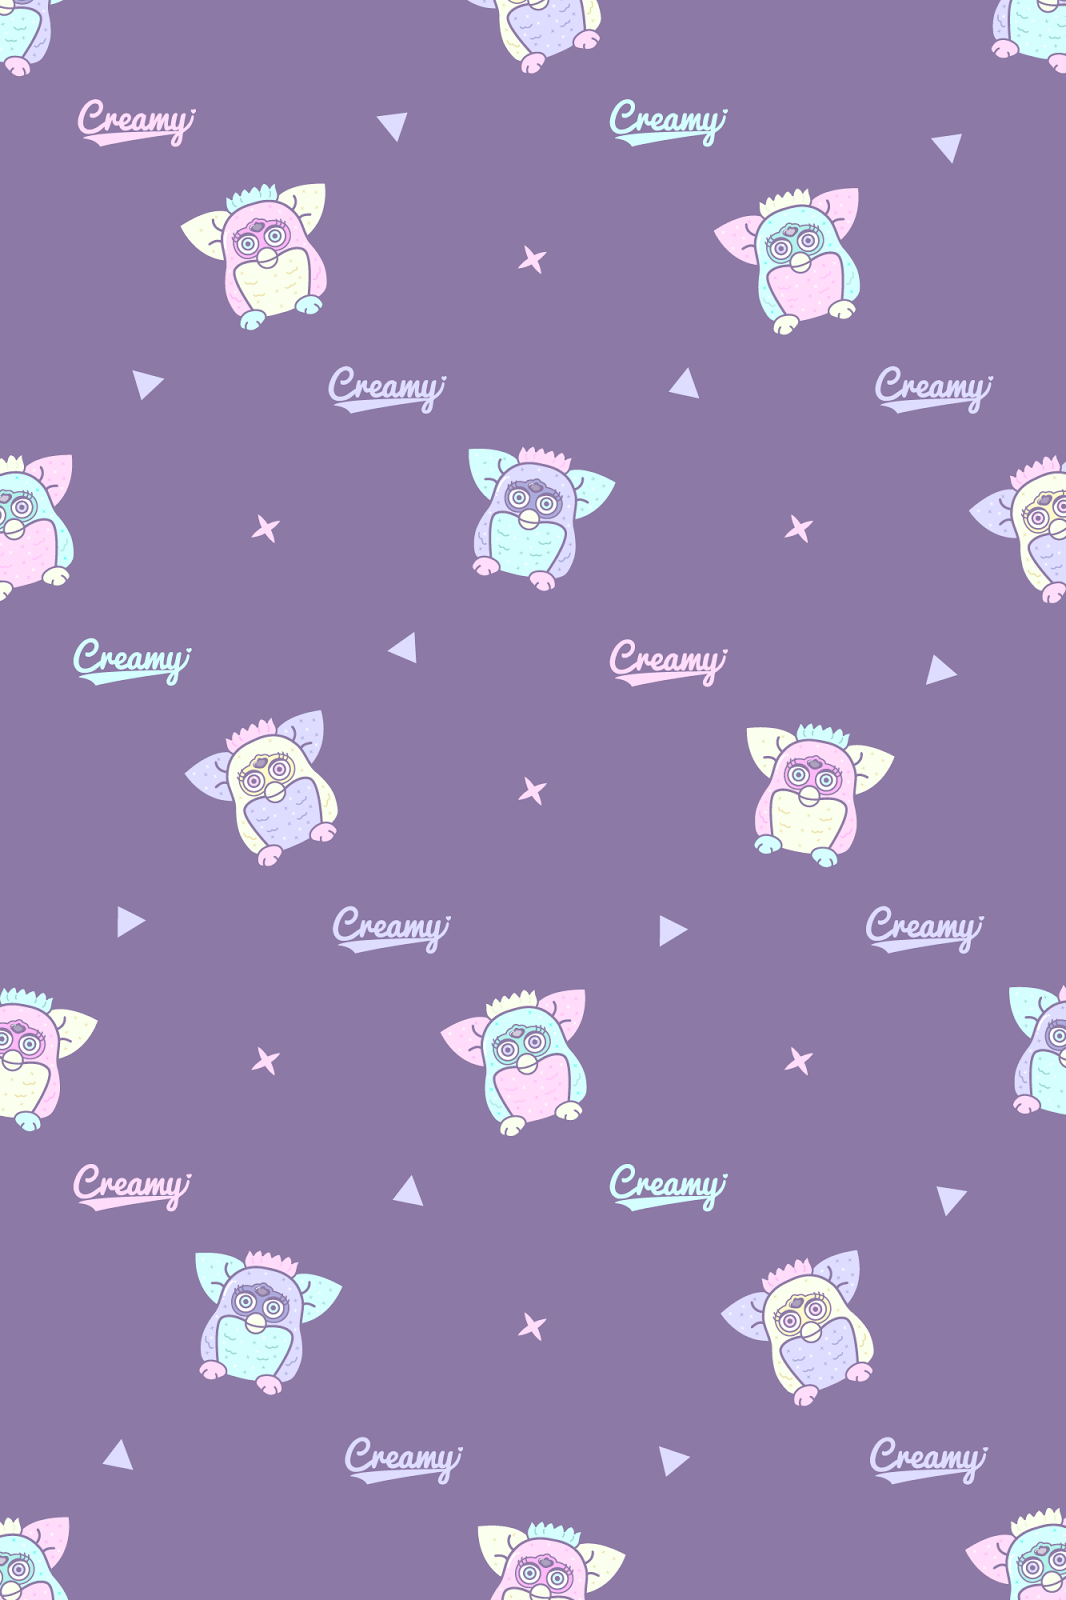 Fun wallpaper for your phone ♥